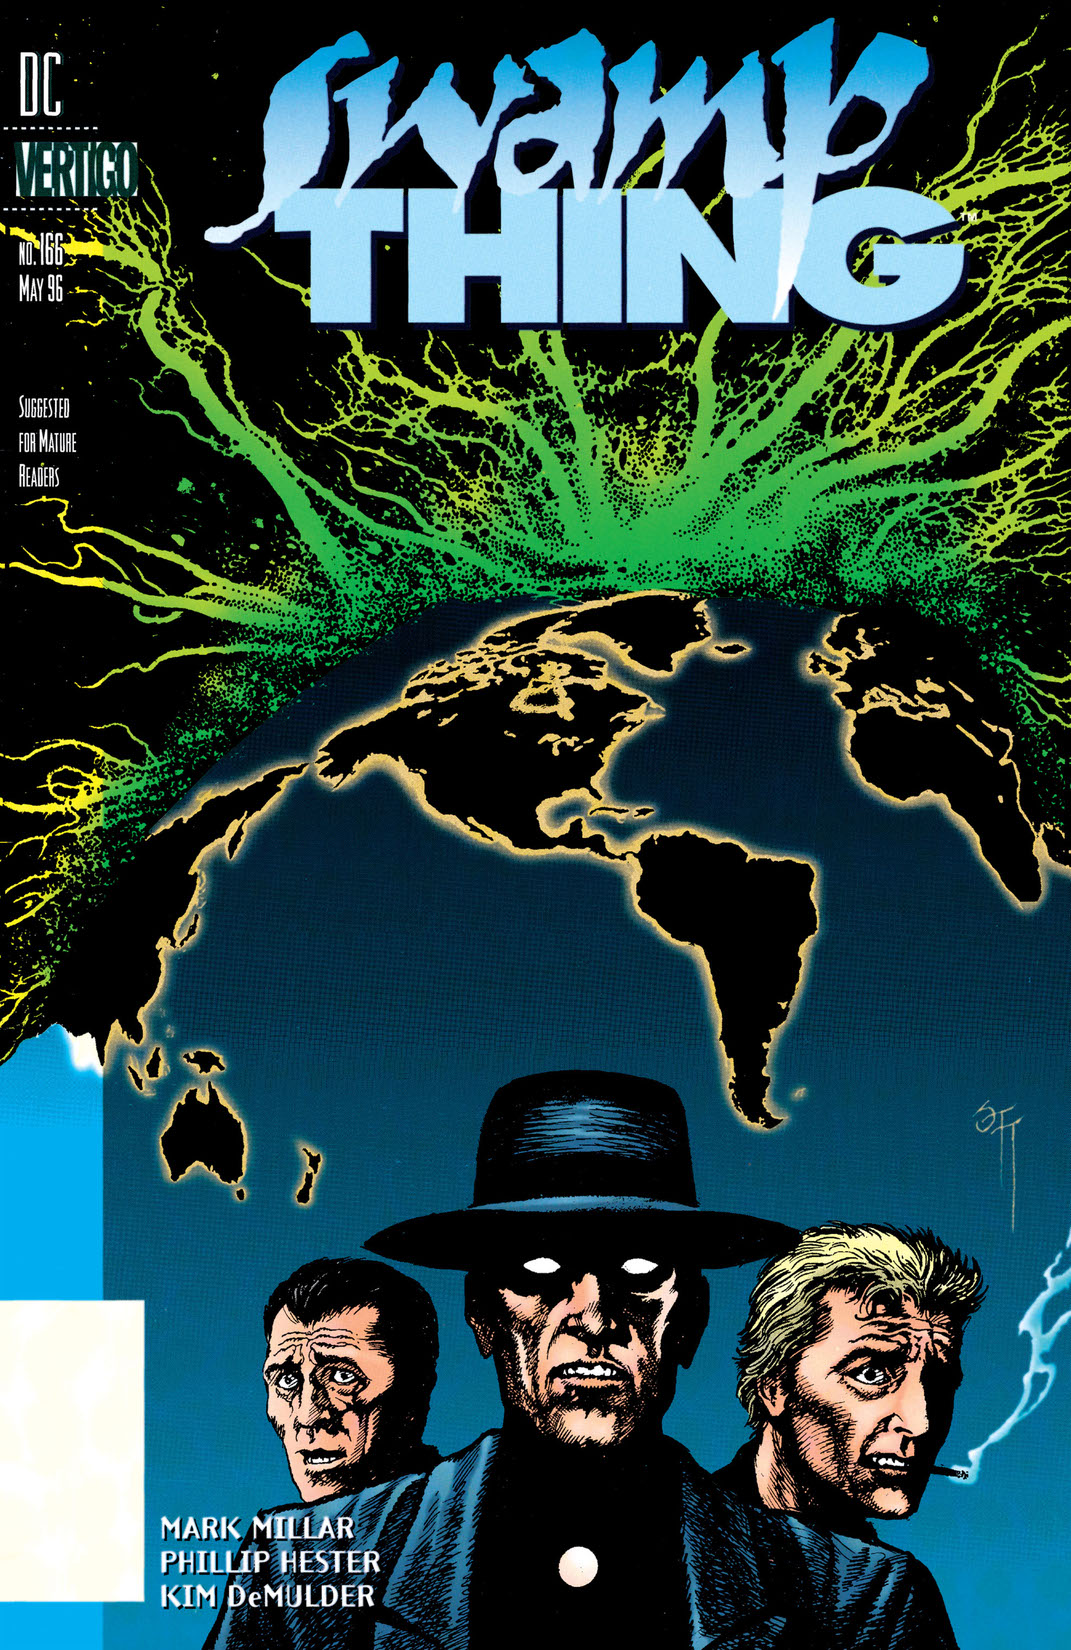 Swamp Thing (1985-) #166 preview images